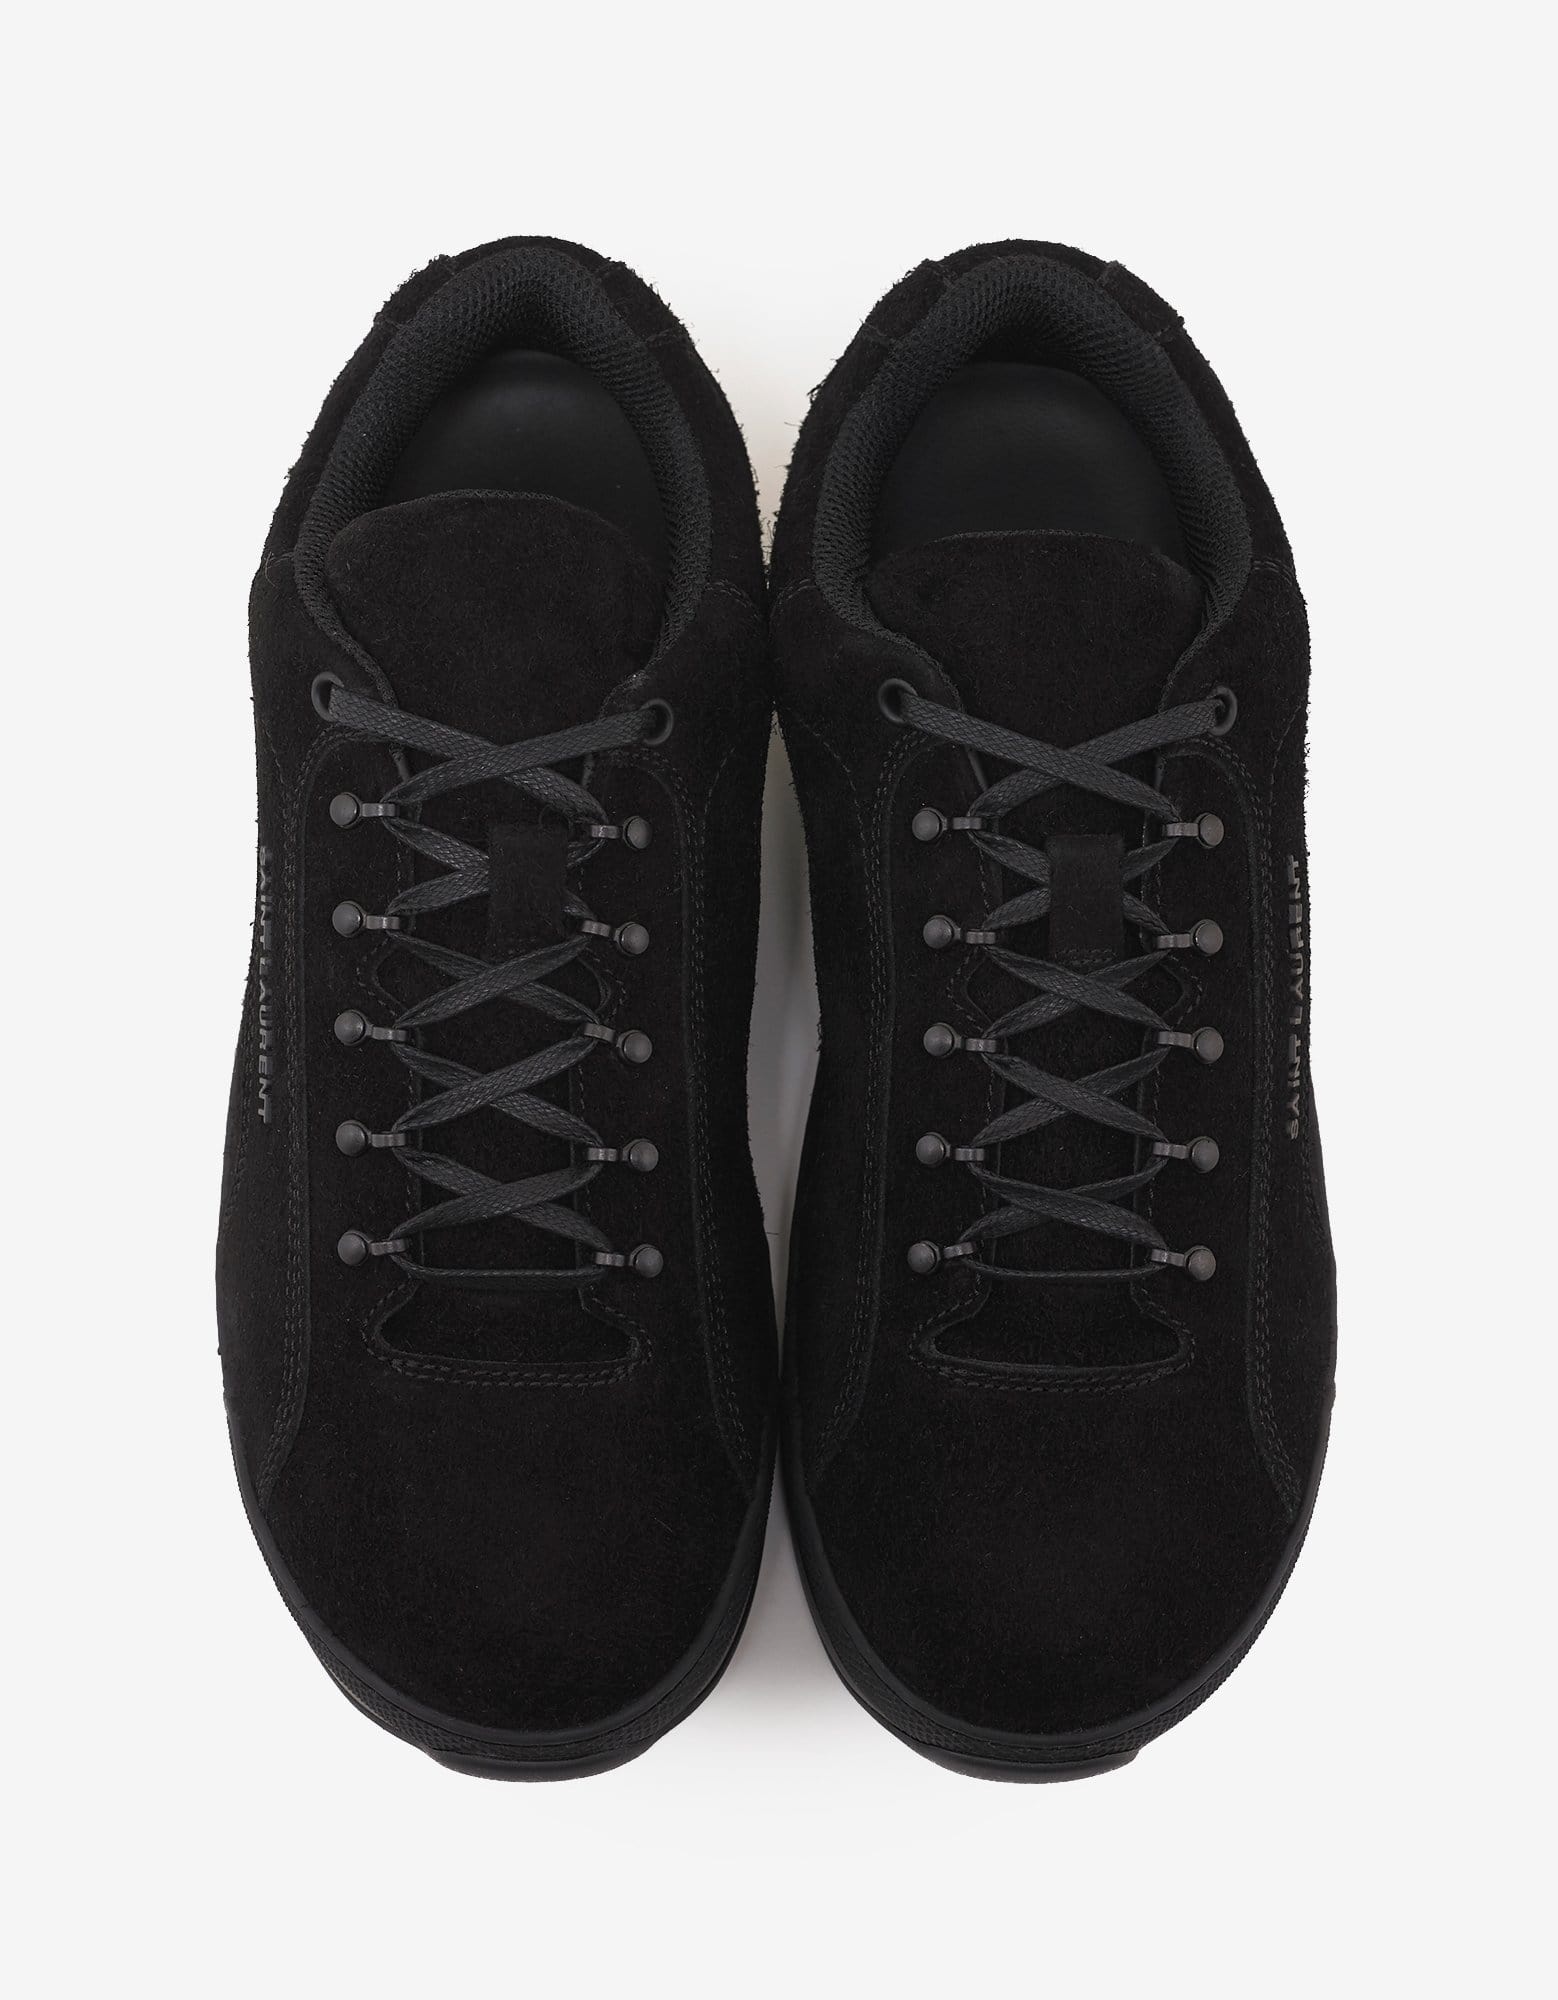 Black Suede Leather Jump Trainers - 5